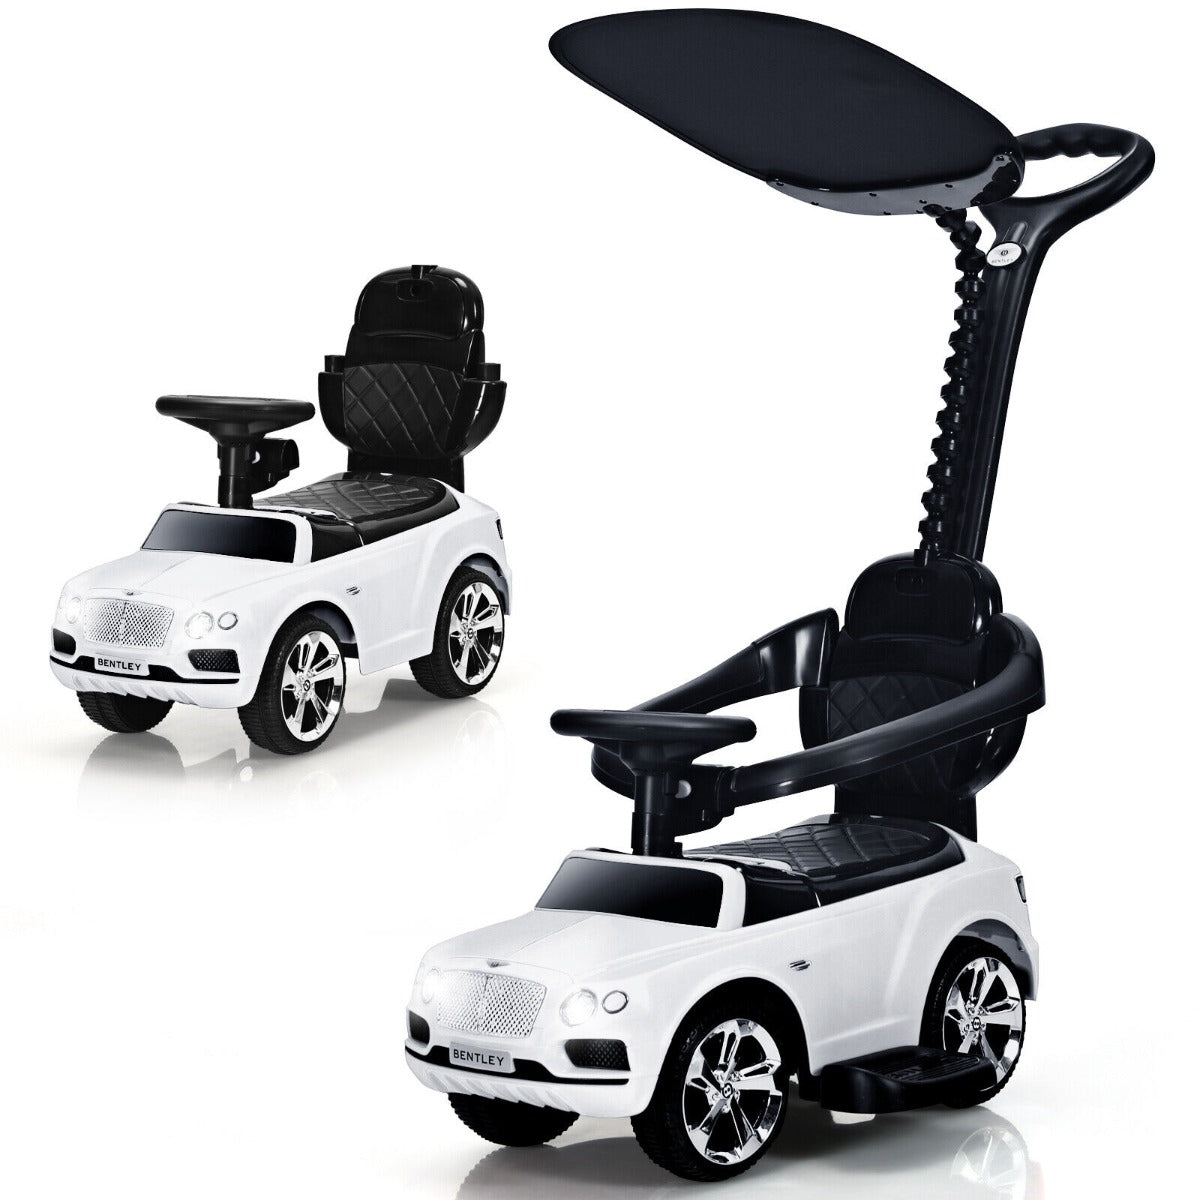 Kids Bentley Ride-On Push Car with Canopy - White - Licensed Toy